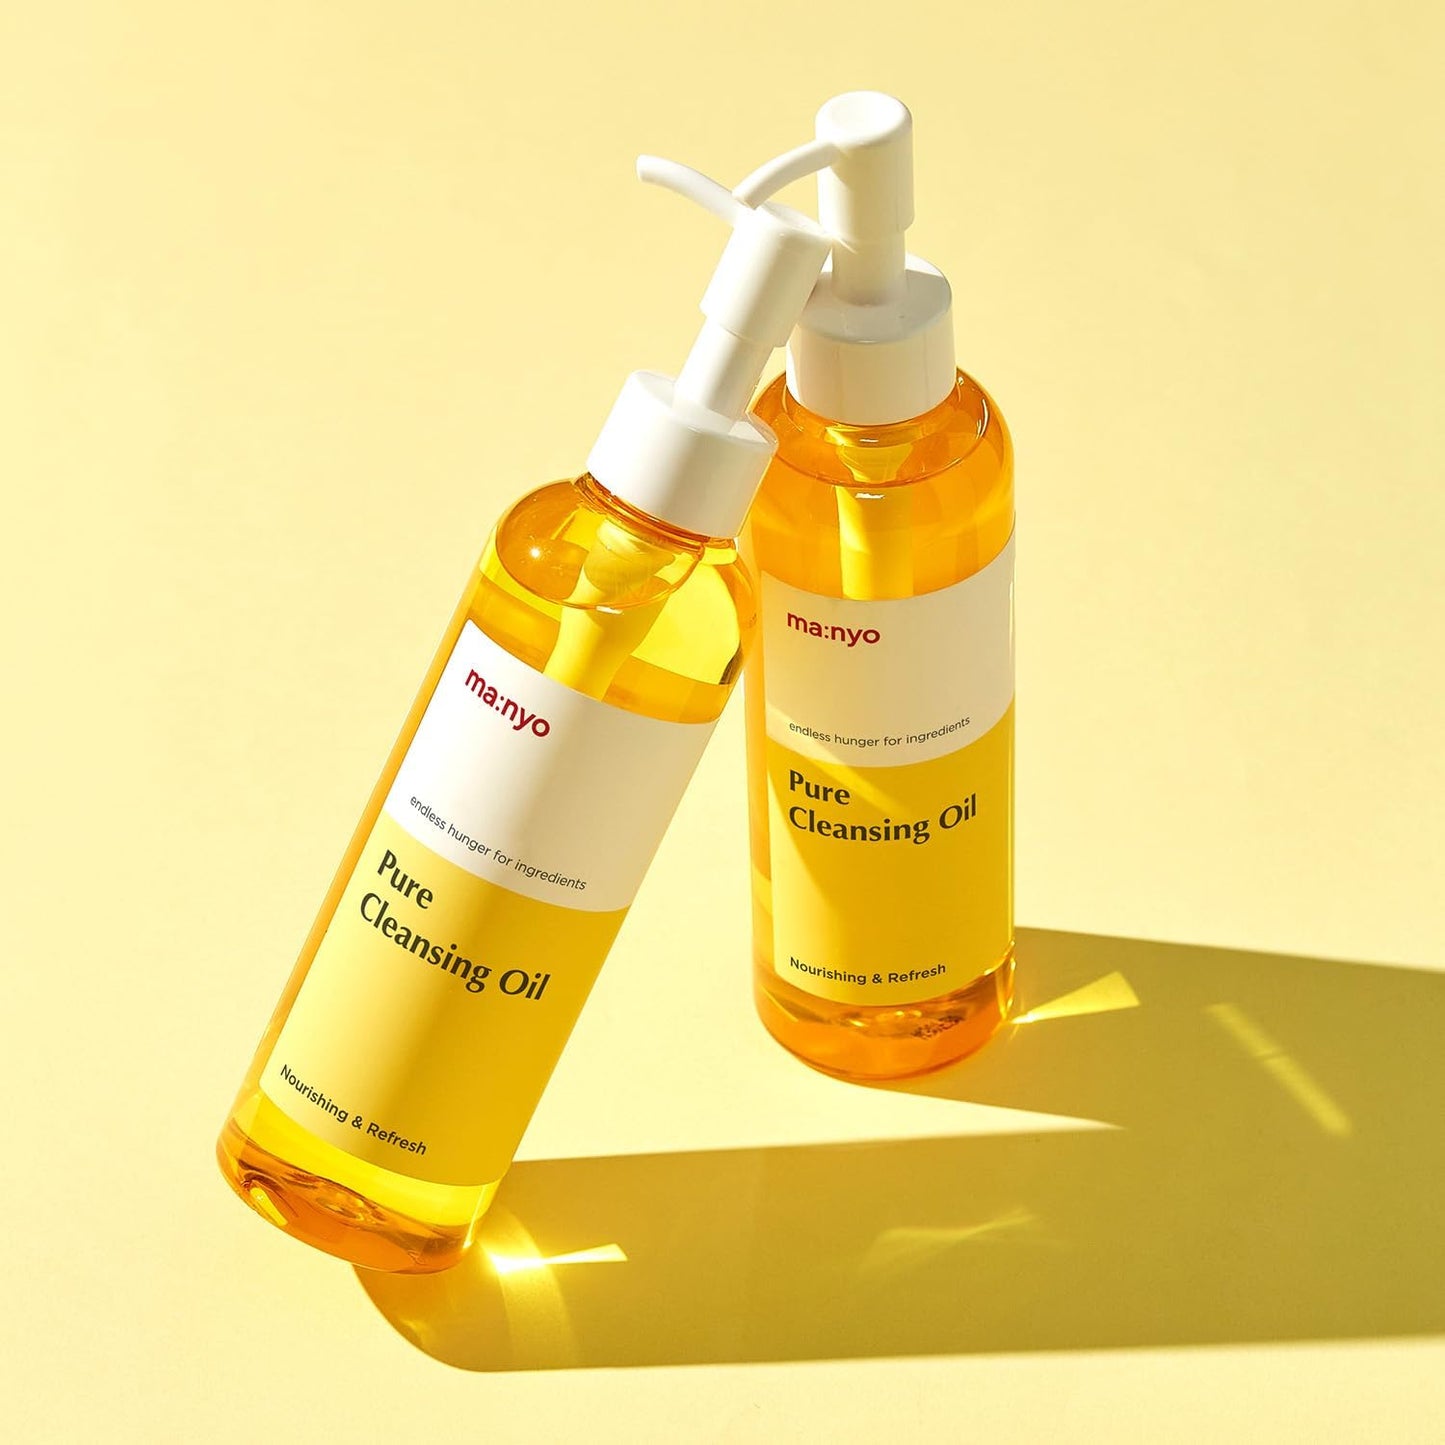 MANYO Pure Cleansing Oil